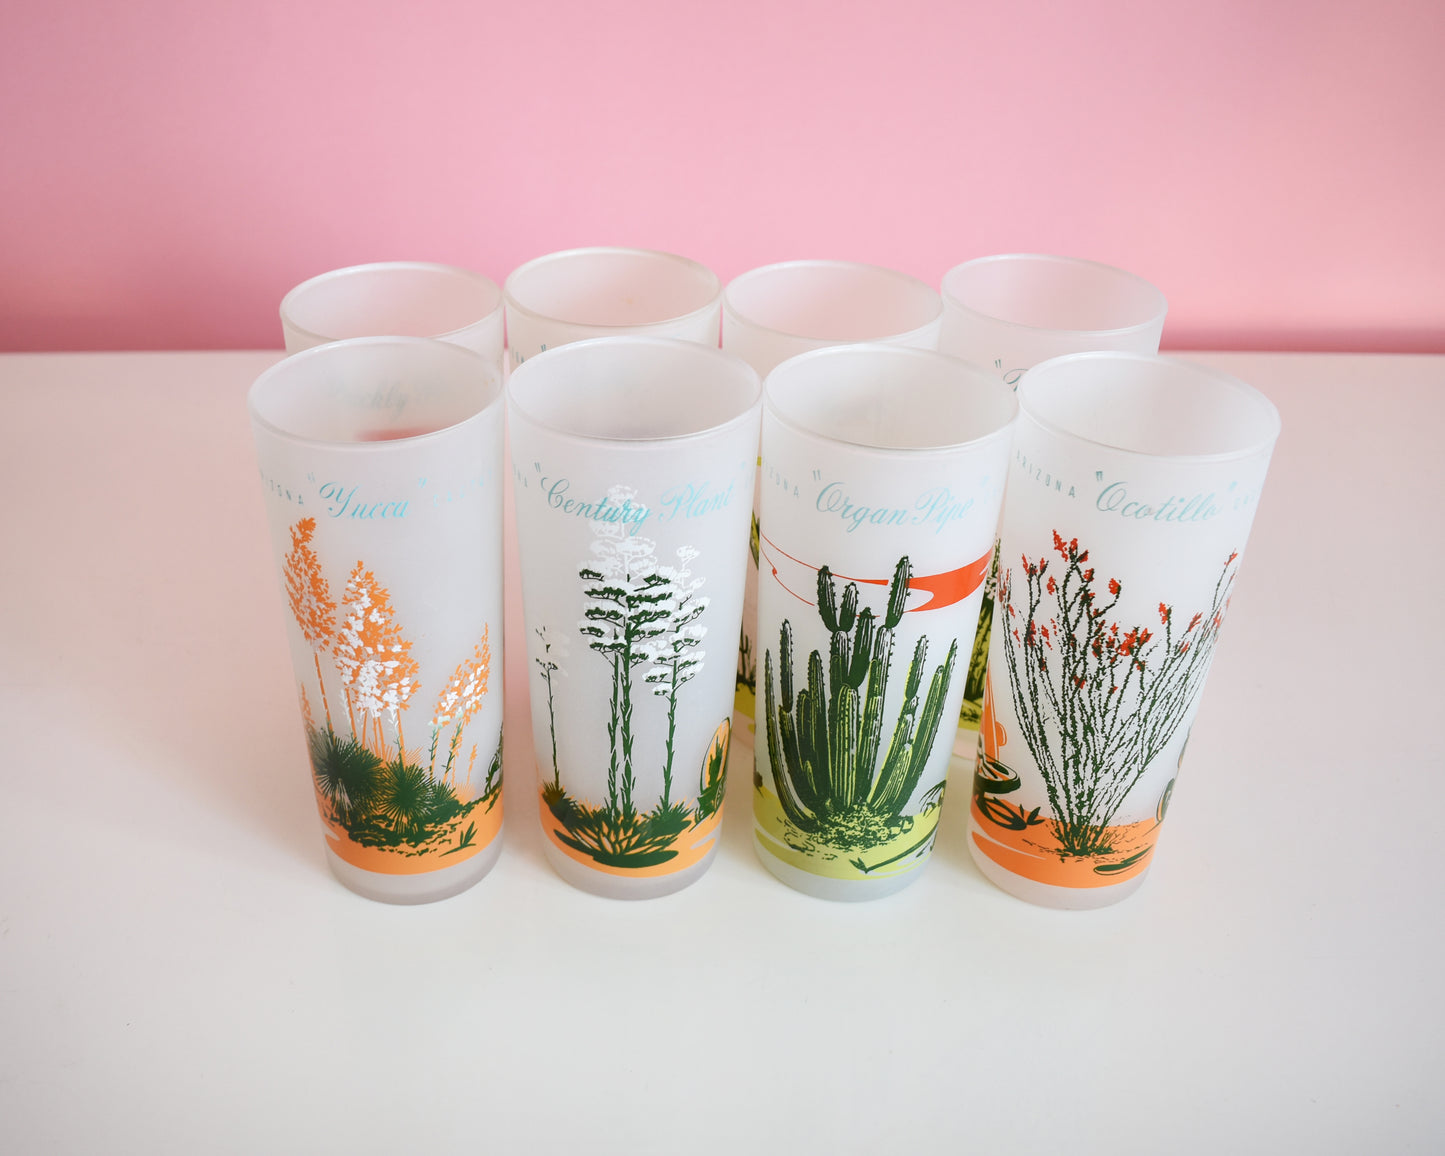 a set of 8 vintage glasses that each have a cactus or plant that is native to Arizona